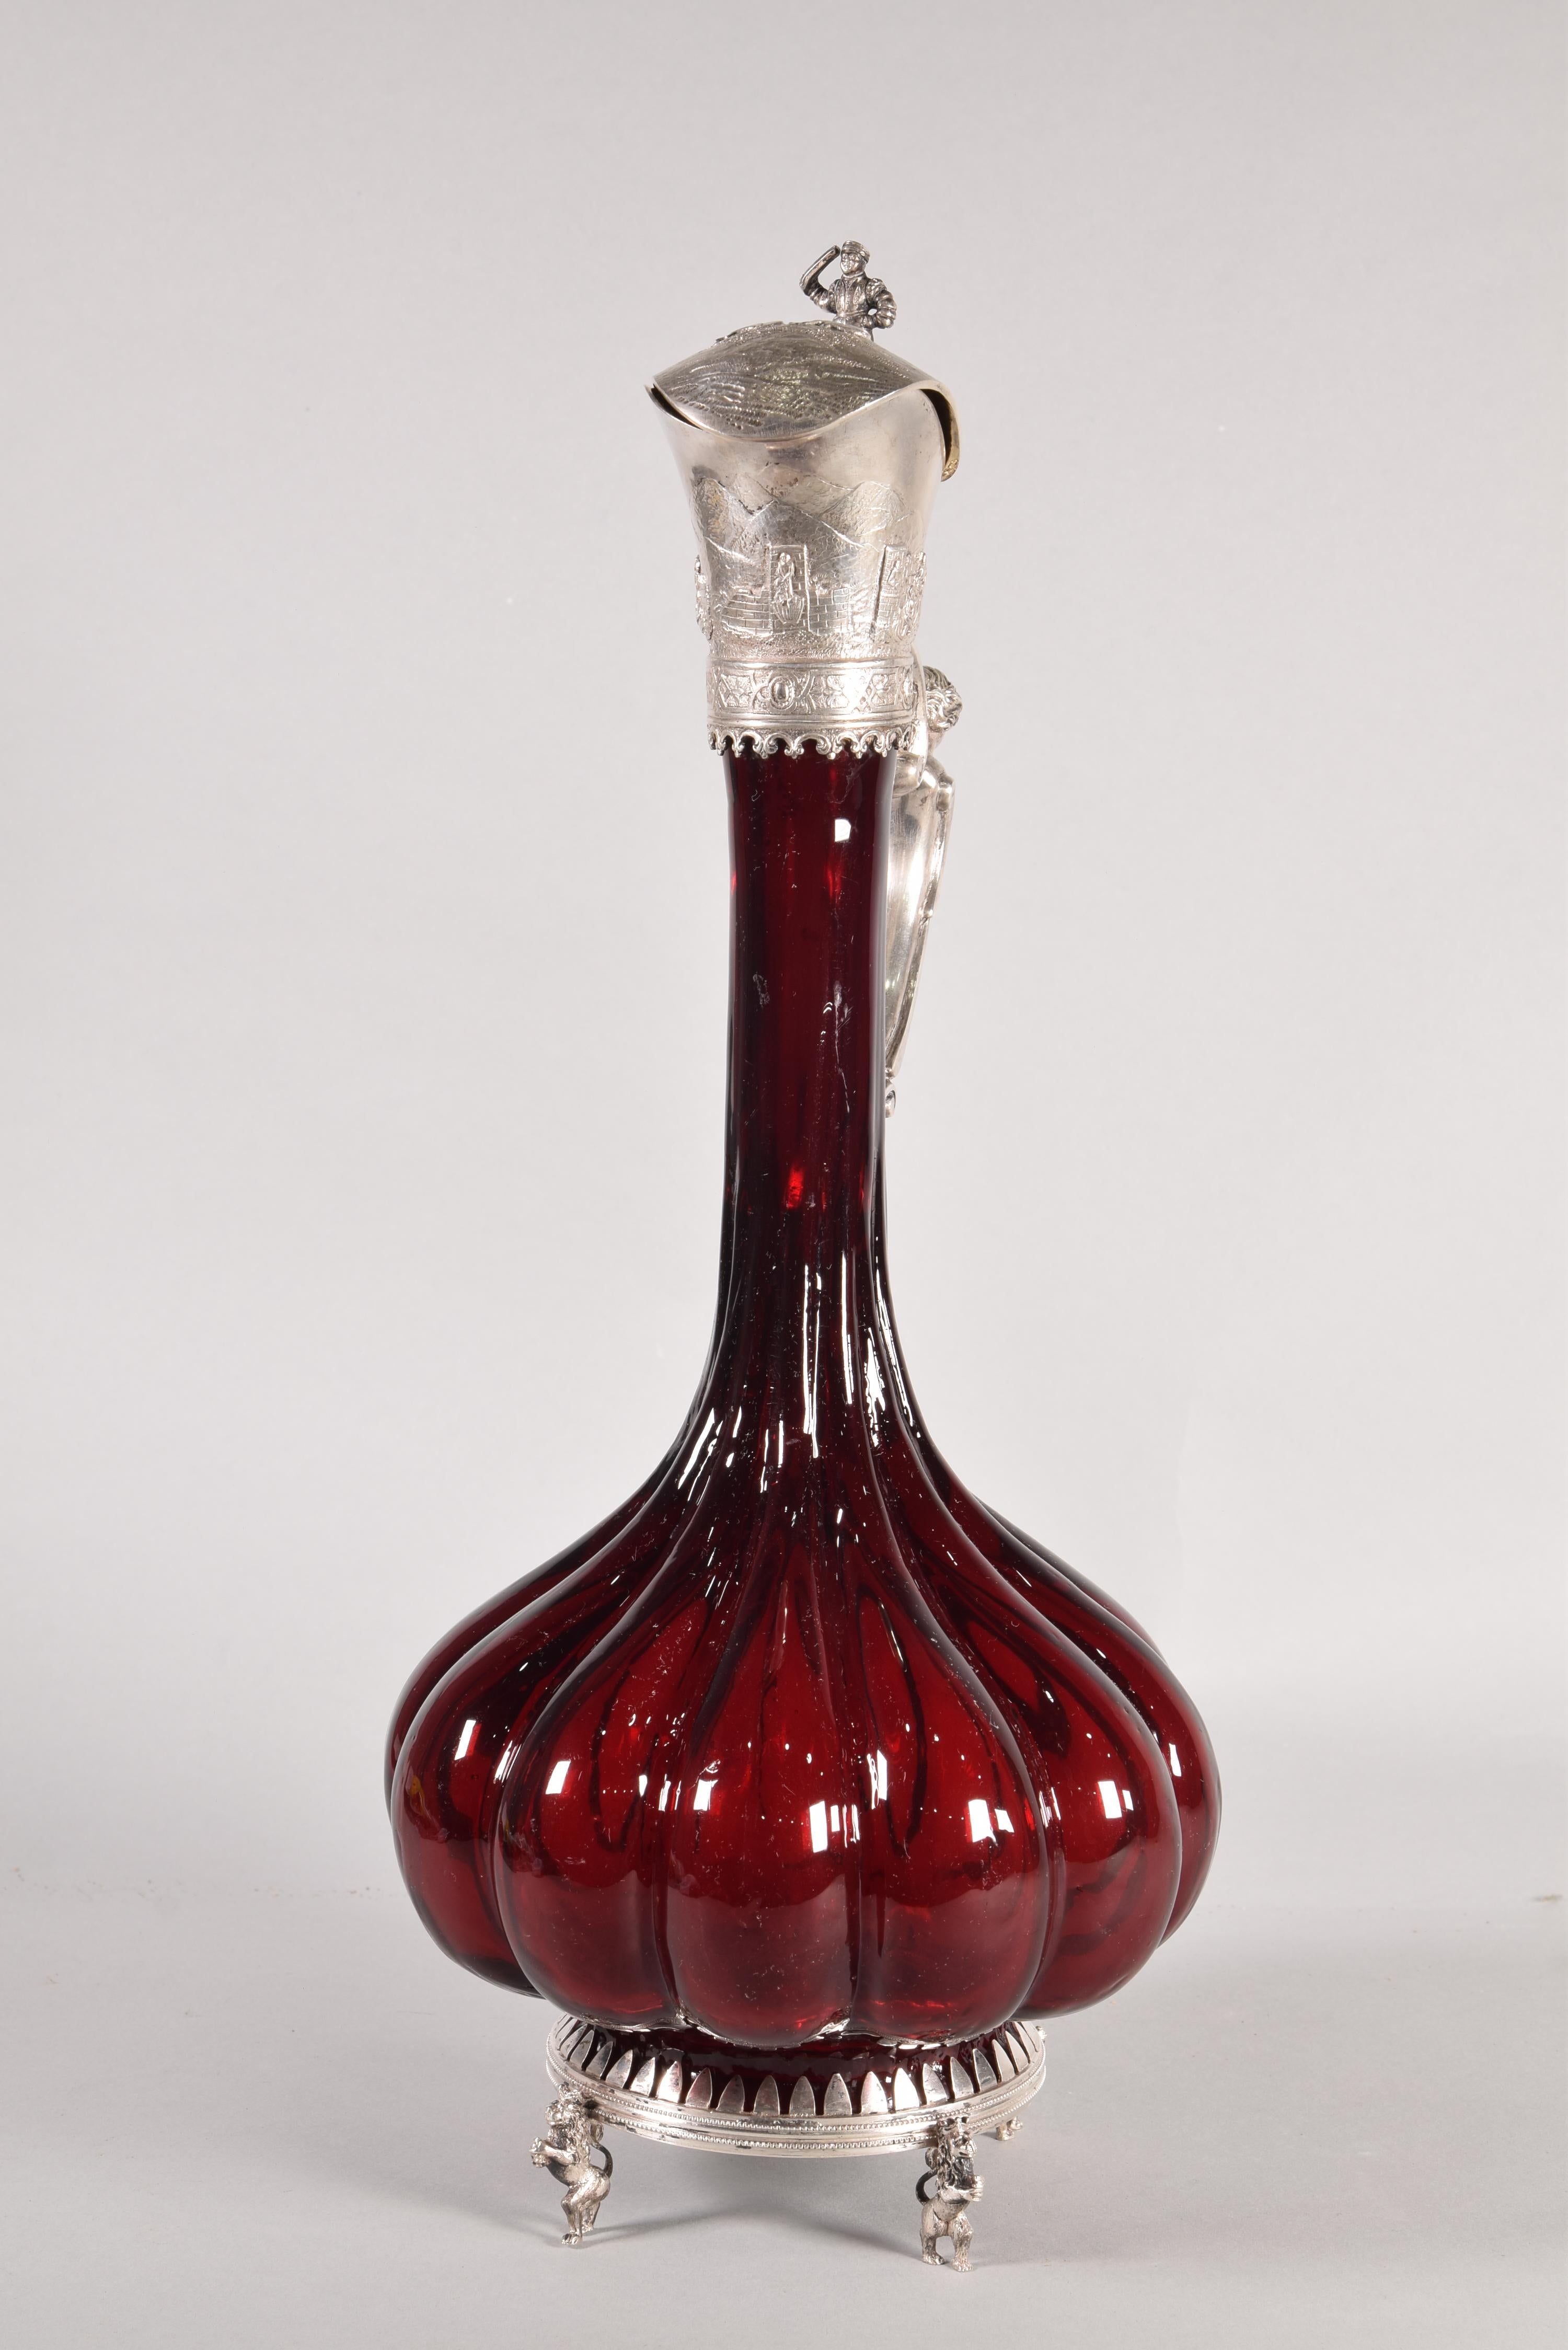 Jug. Garnet glass, silver frame. Possibly Germany, 19th century. 
 With contrast markings. 
 Jug with a dark red glass body and gallon shape, widening towards the base, and a silver frame in its color. It has a base supported by rampant lions, a